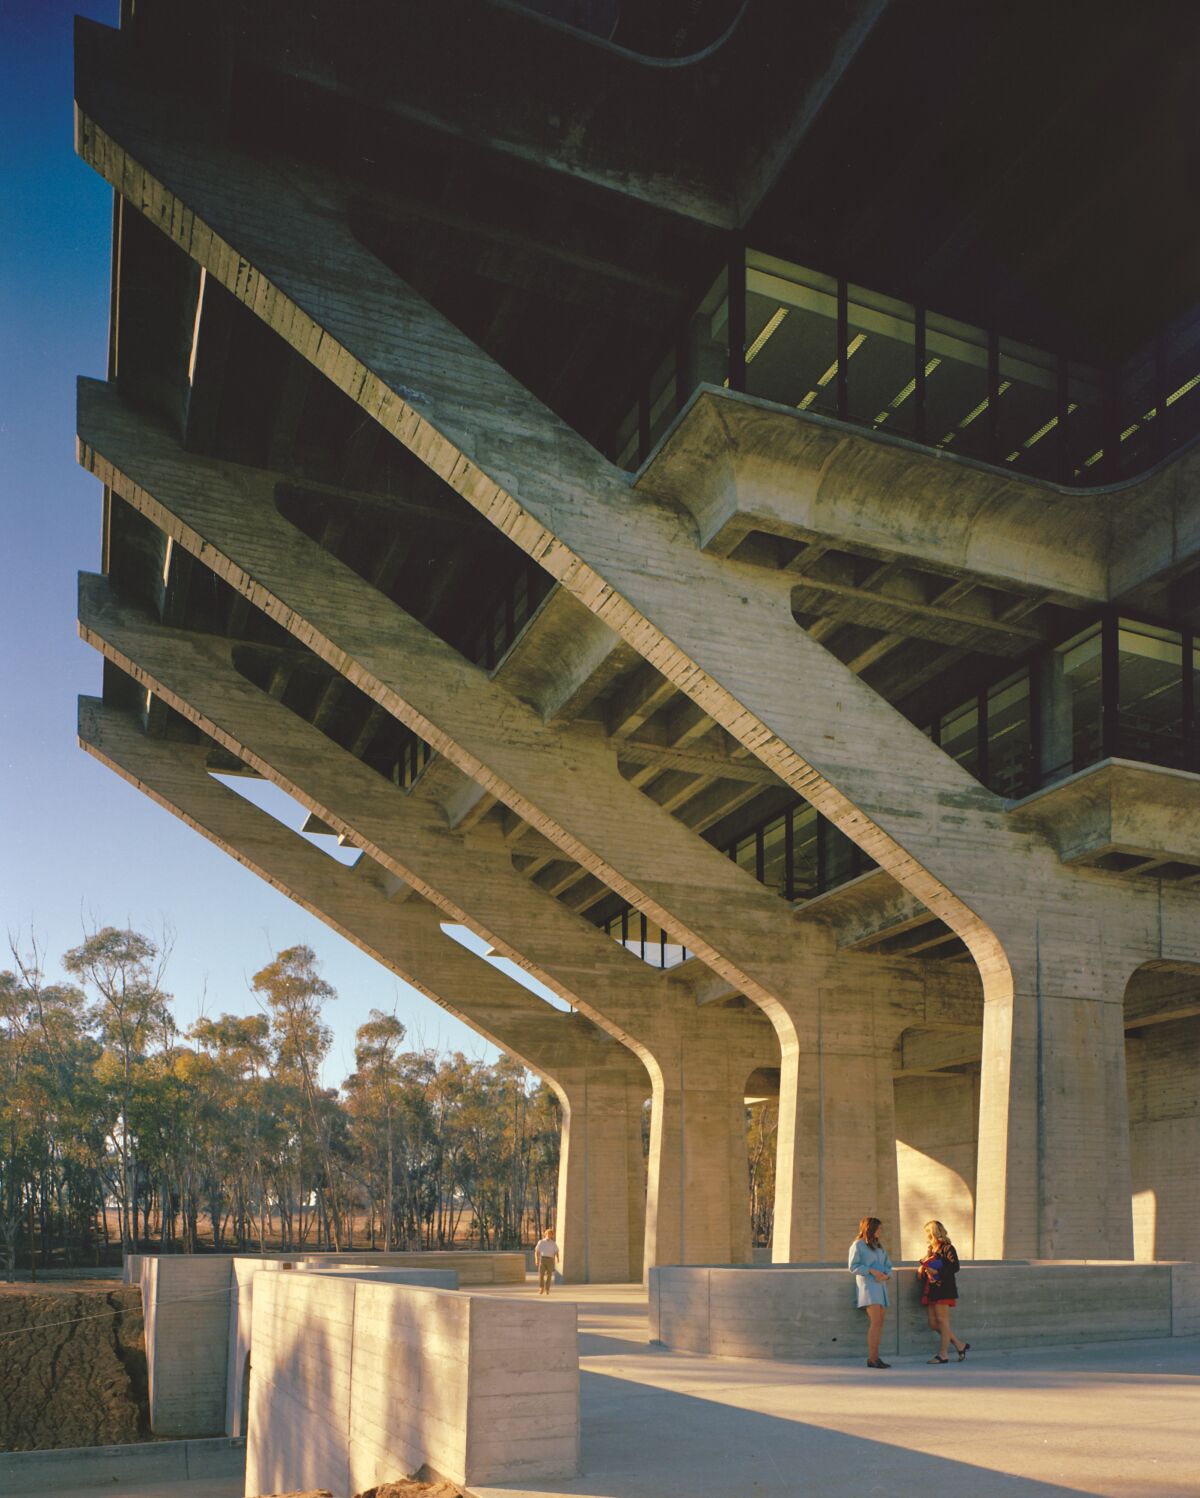 An exterior shot of the Geisel Library, University of California, San Diego.